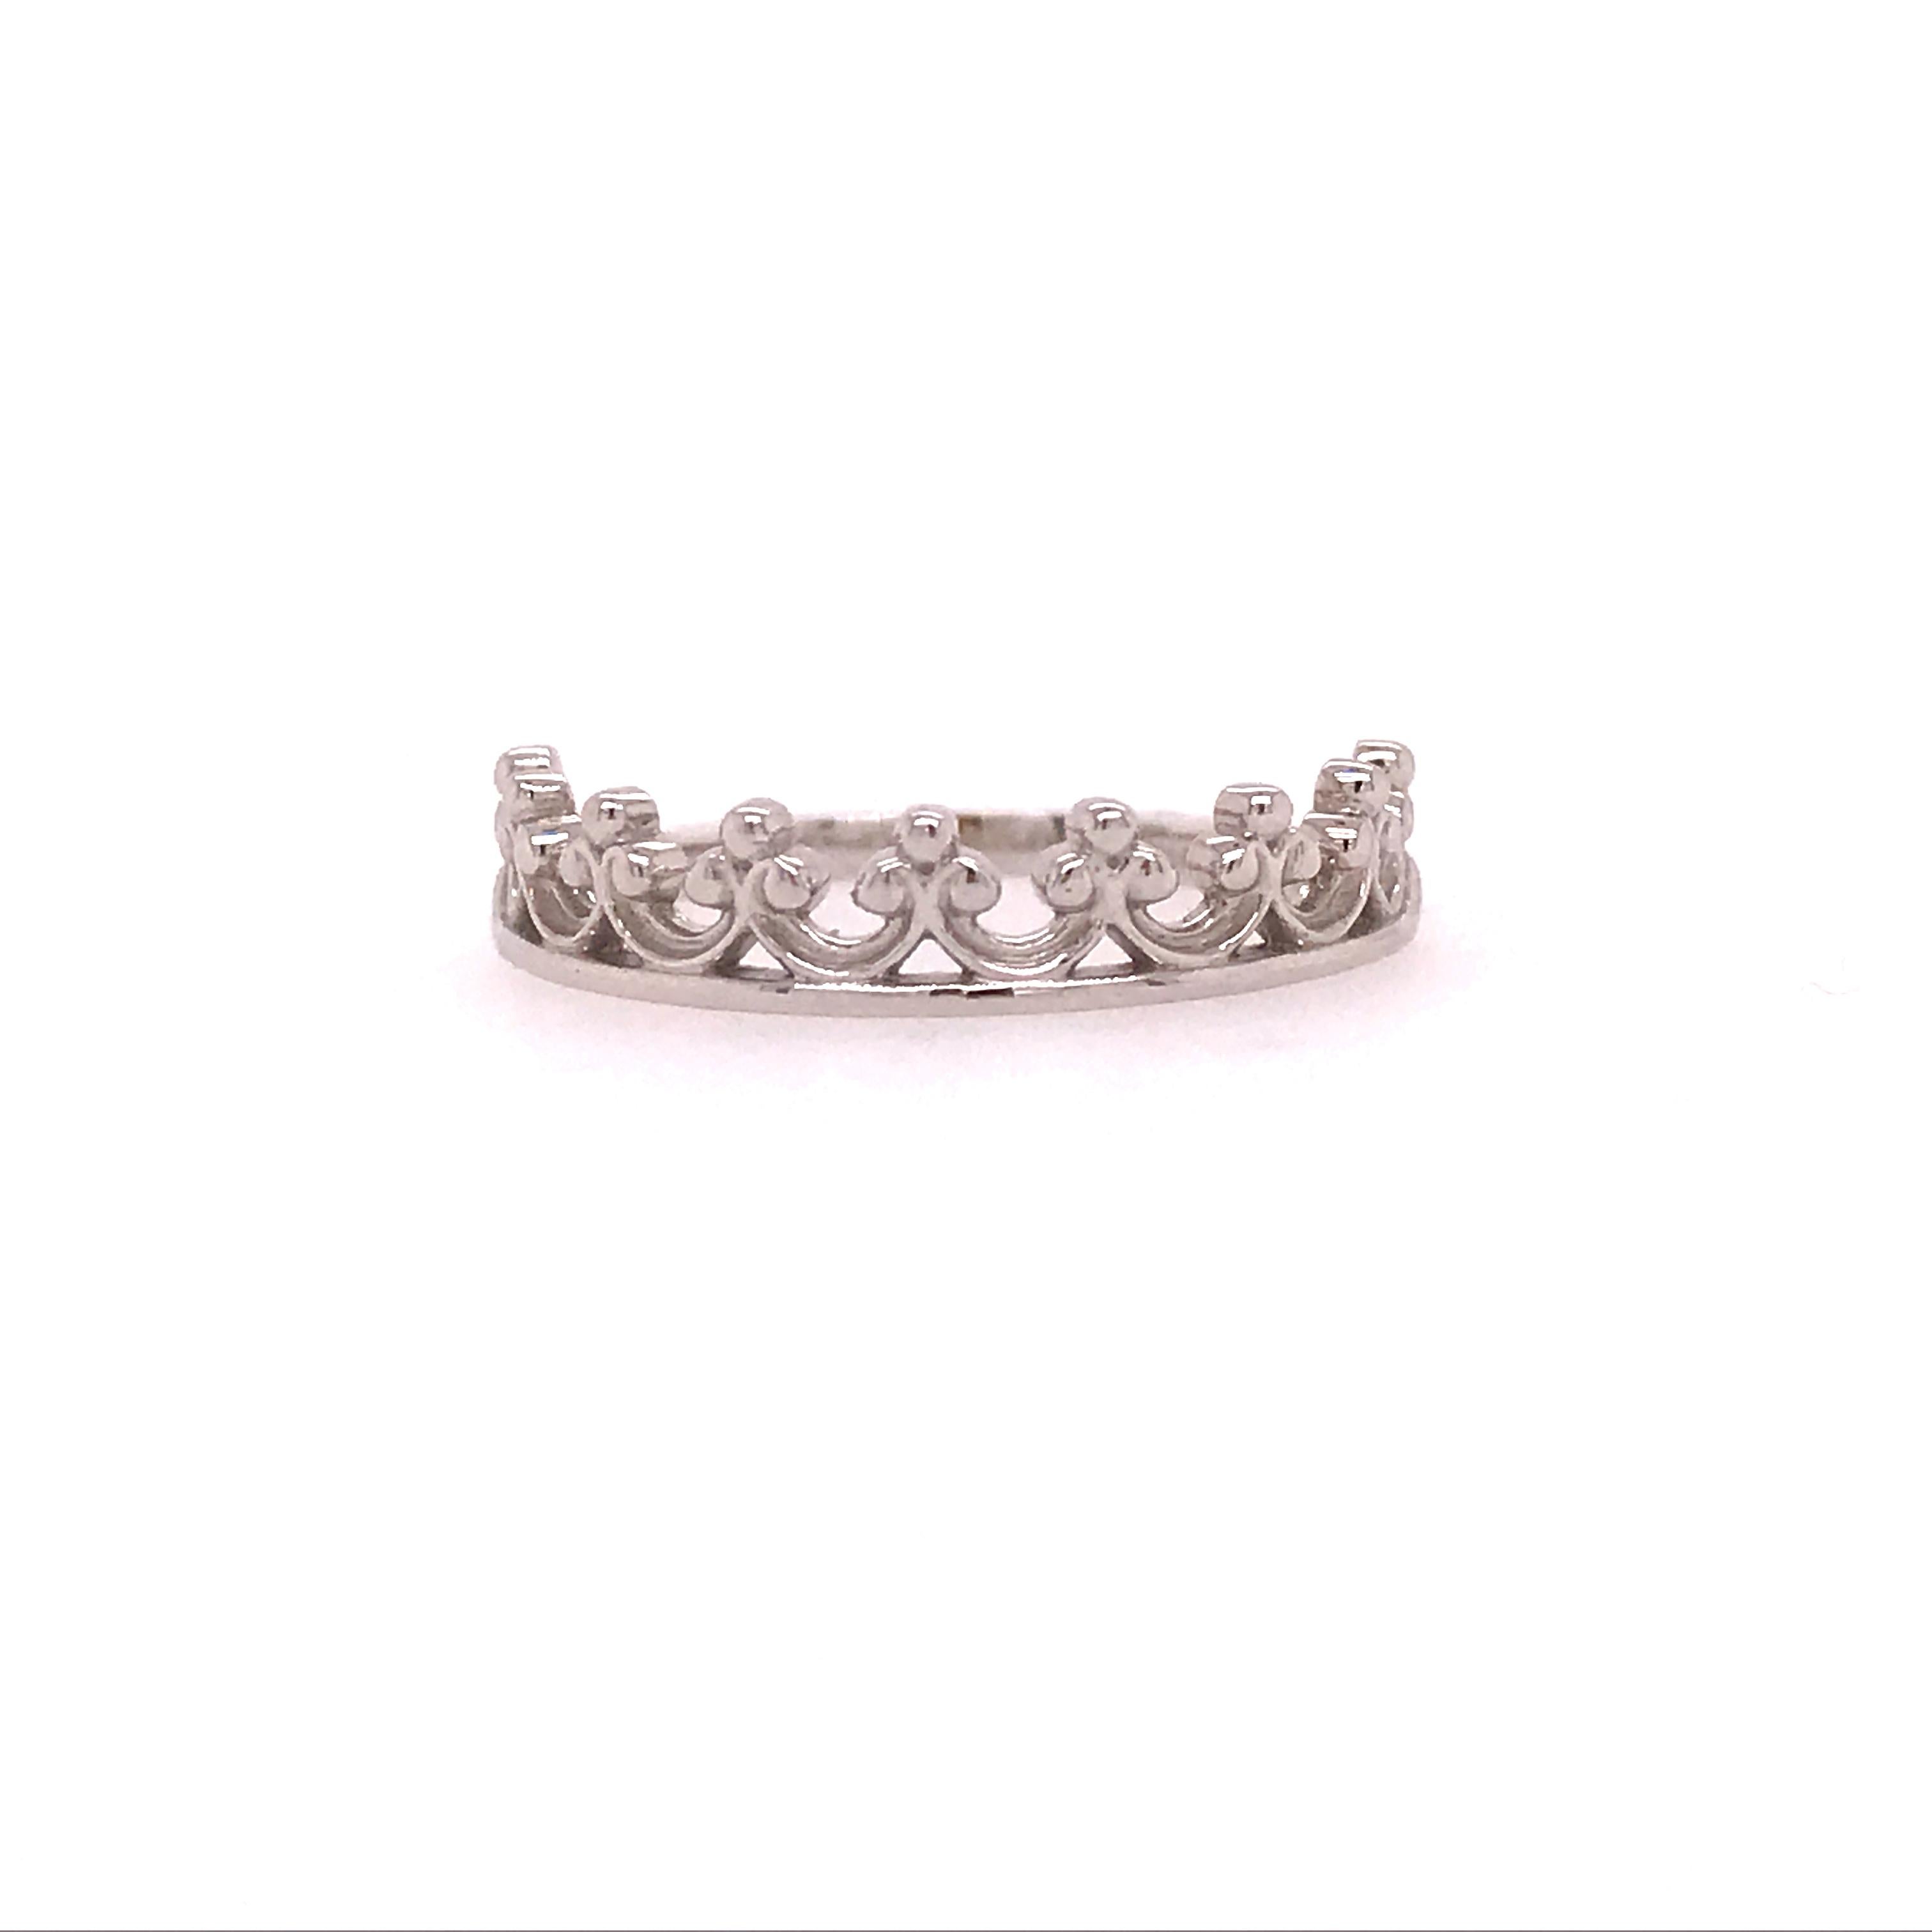 This Renaissance, romantic themed designed band is so versatile and fun! Pair this with an engagement ring (see our images above) for a unique addition to your forever ring or stack it with diamond bands for a fun pop of character! This ring can be